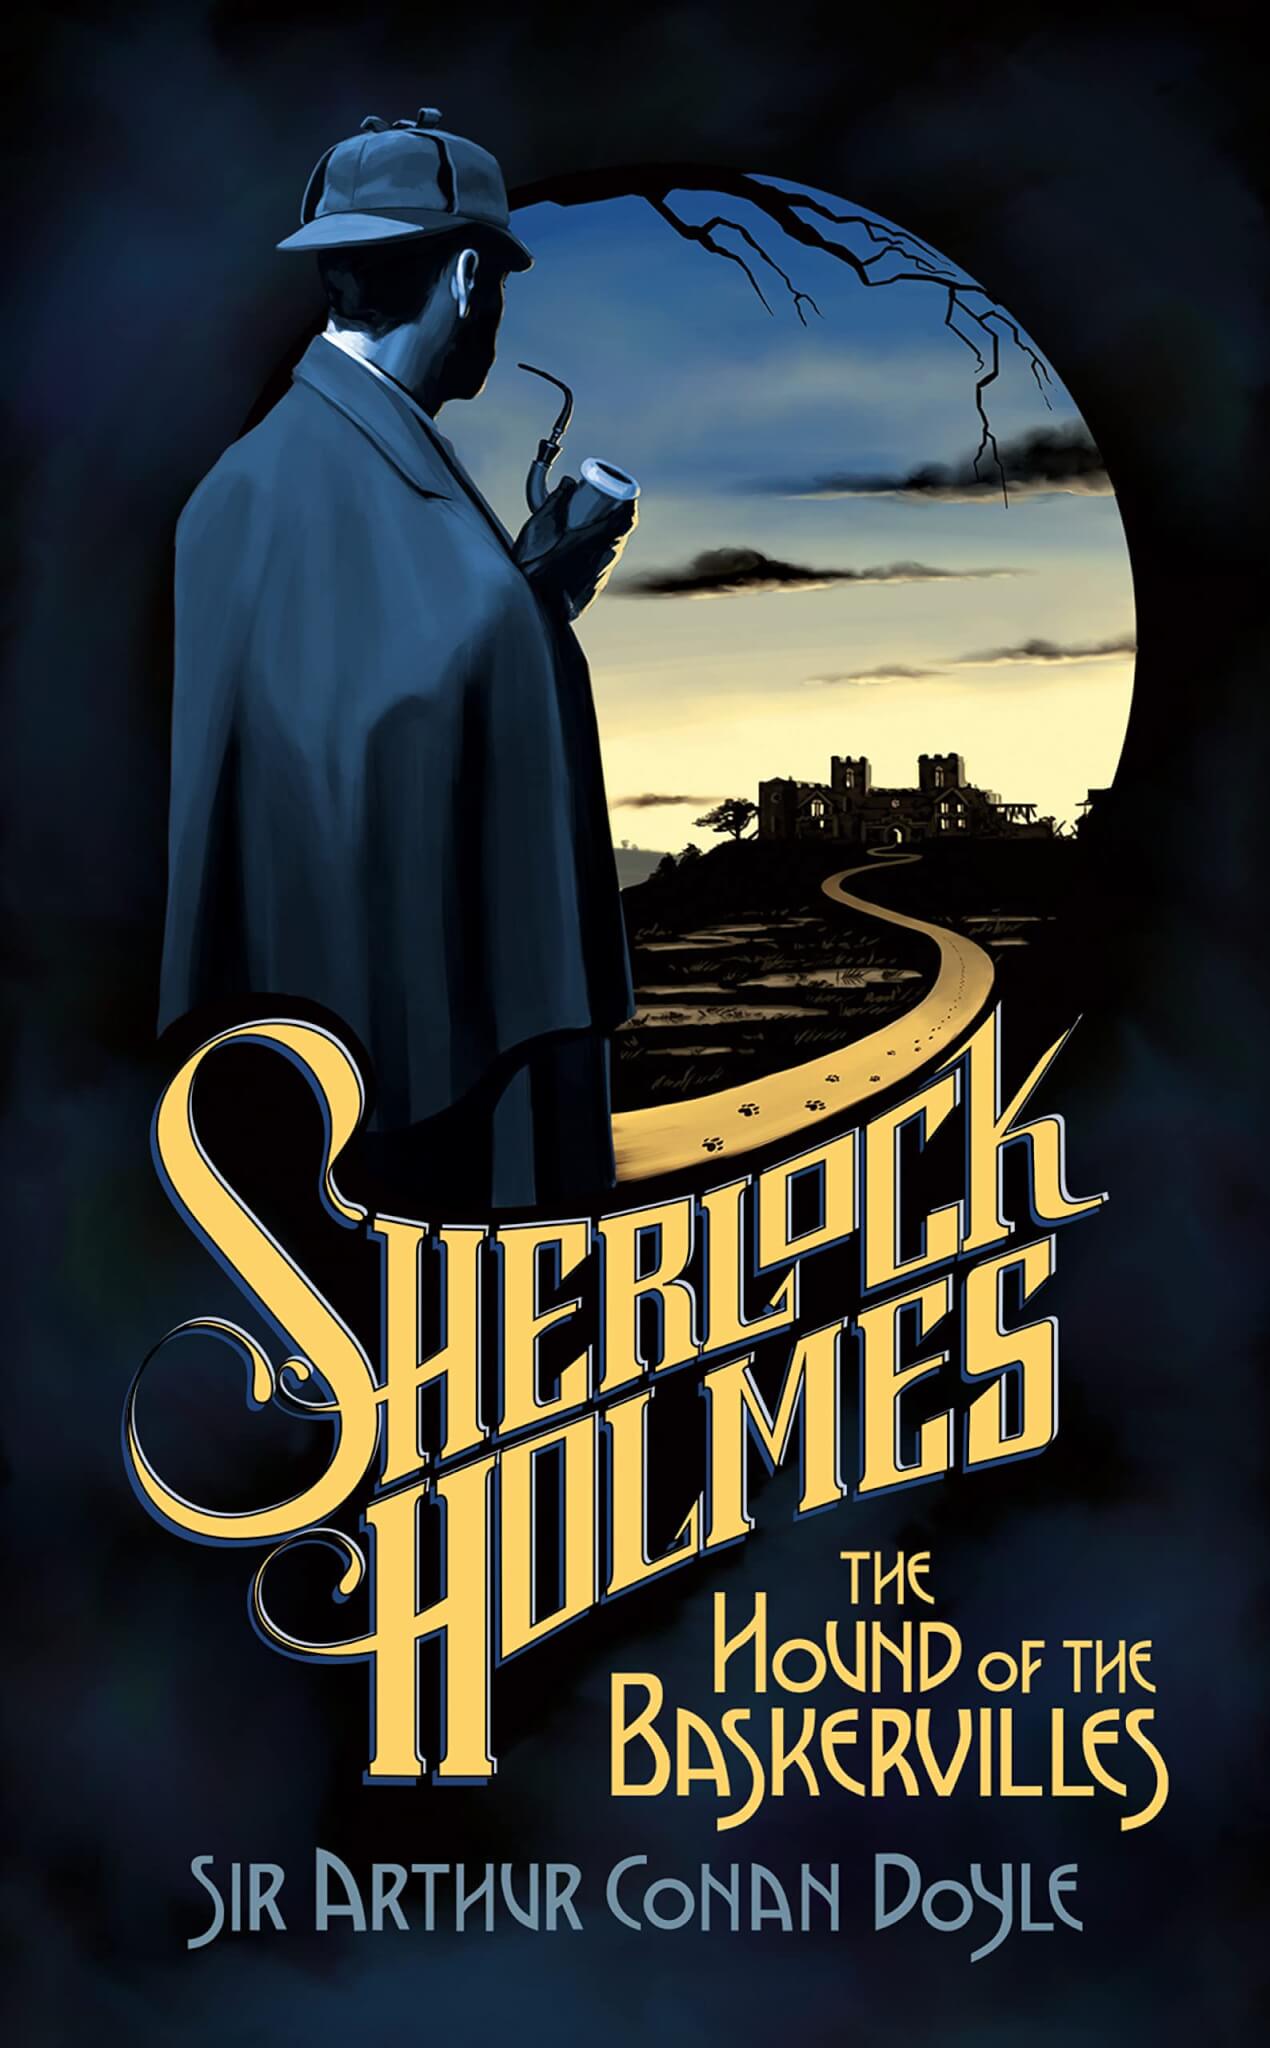 "The Hound of the Baskervilles" by Sir Arthur Conan Doyle